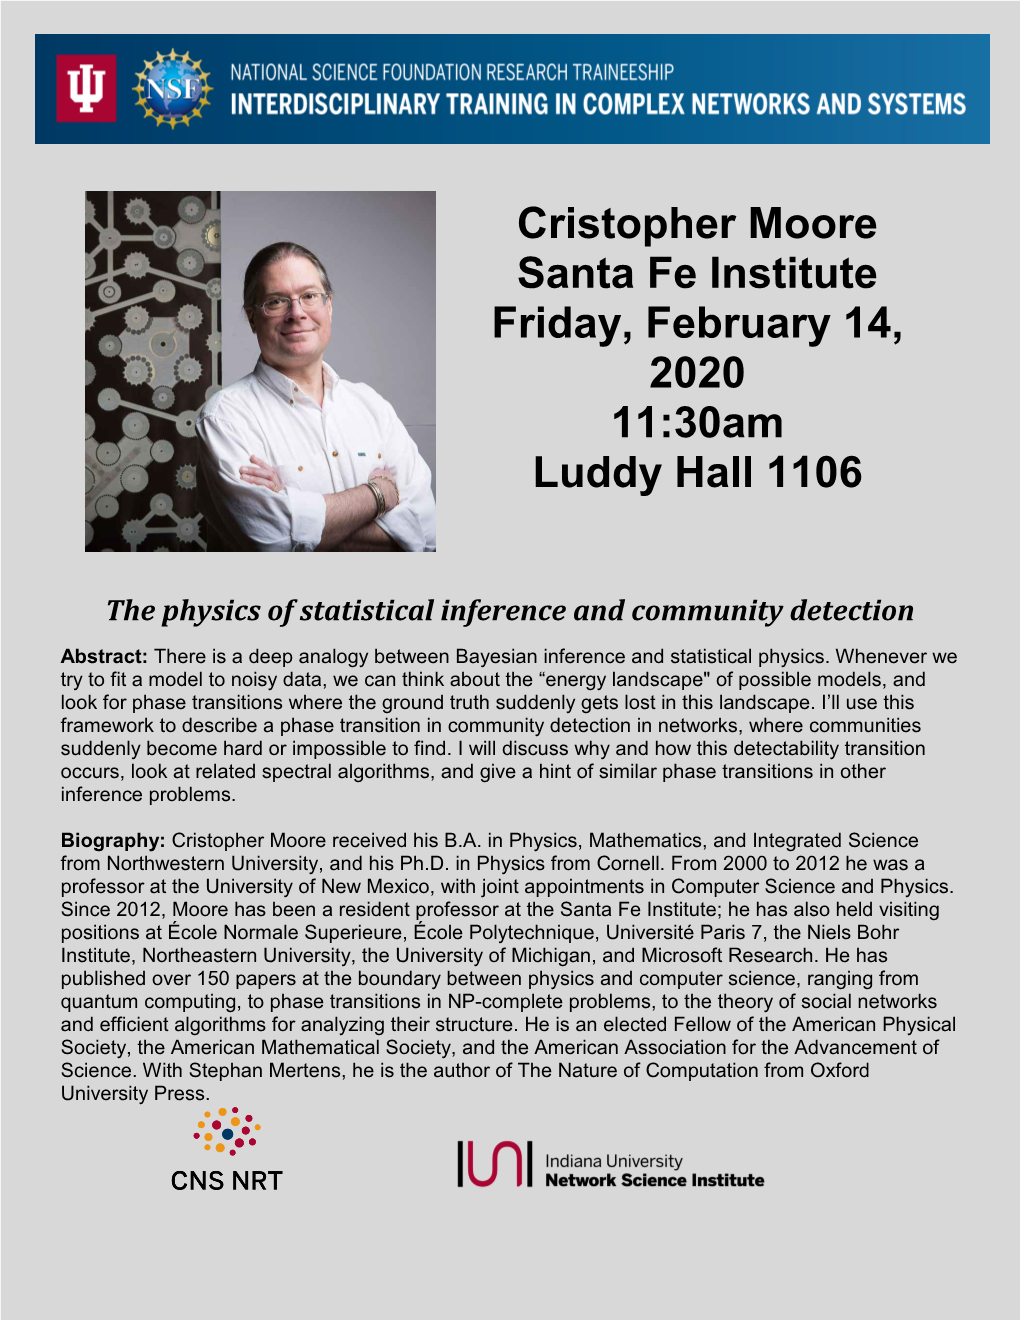 Cristopher Moore Santa Fe Institute Friday, February 14, 2020 11:30Am Luddy Hall 1106